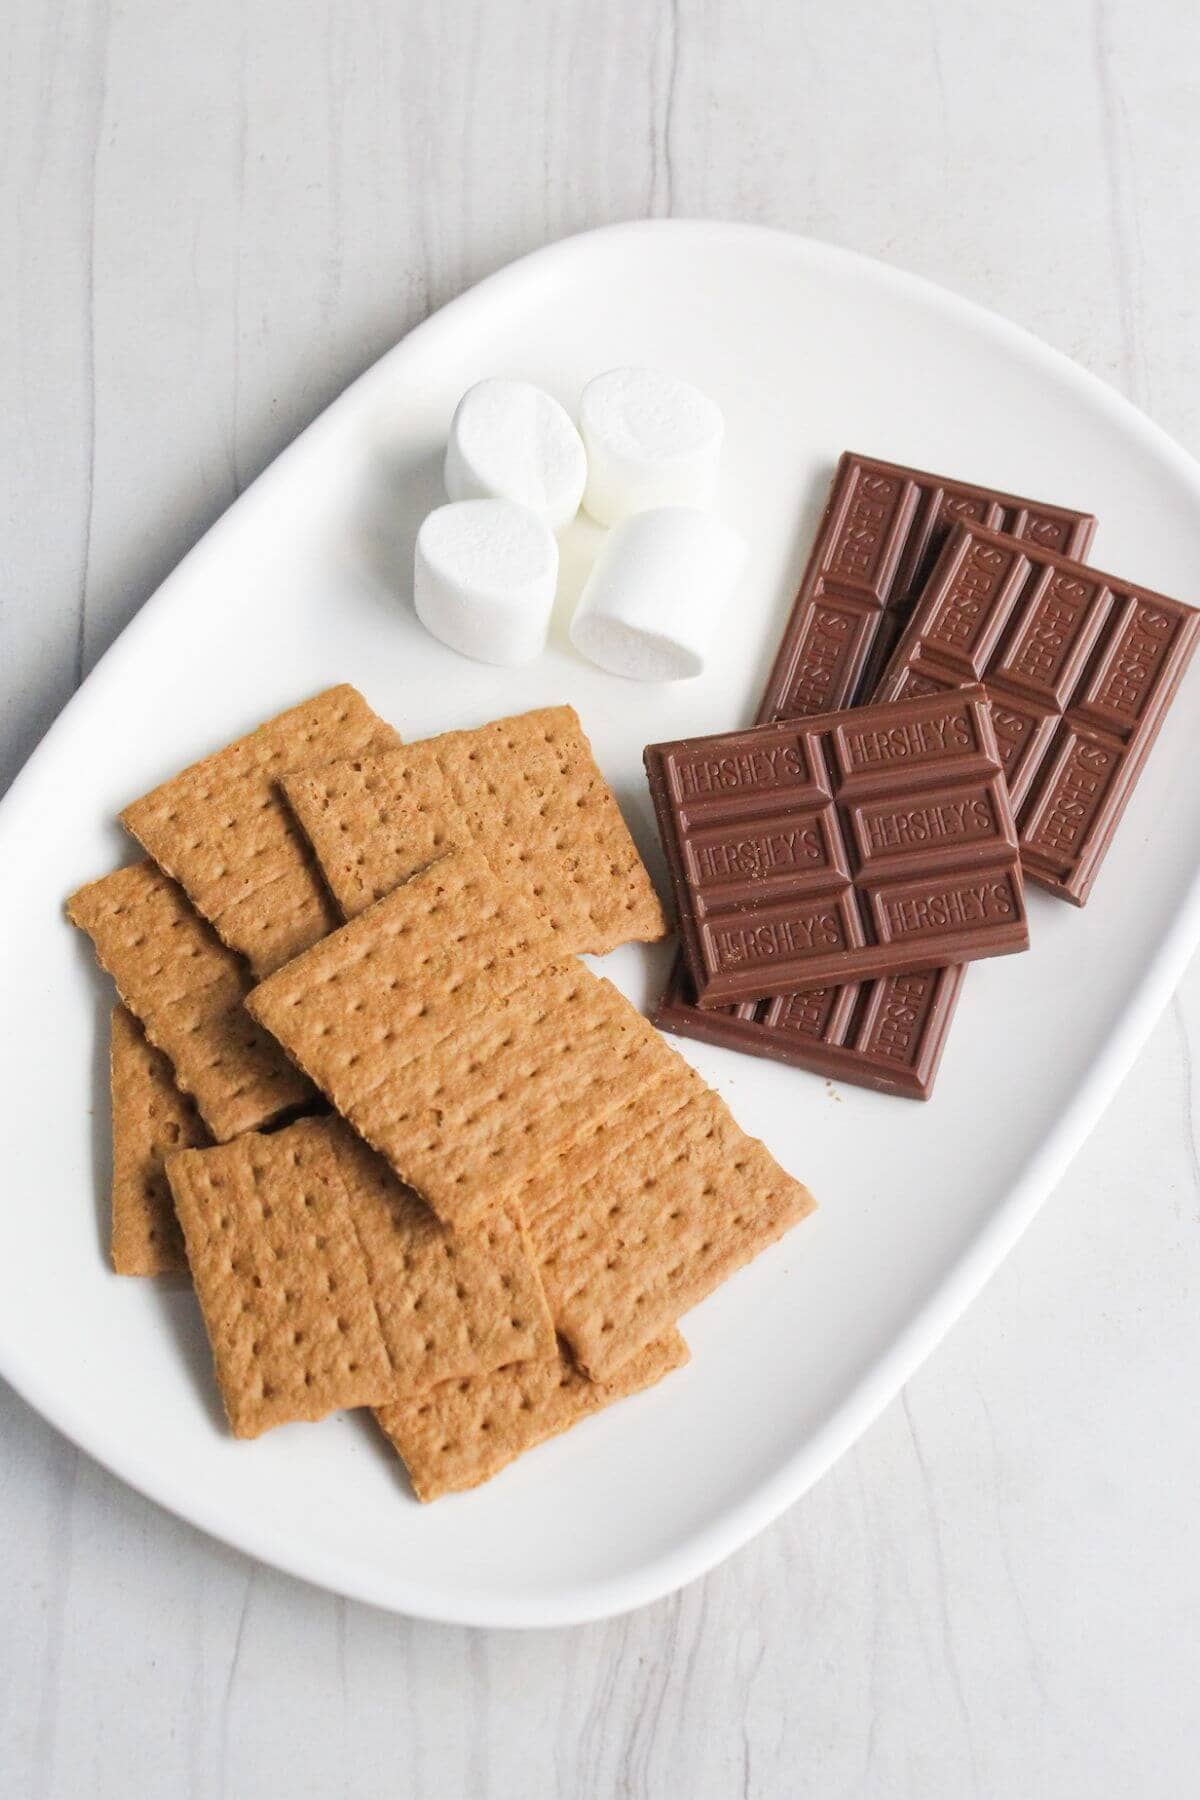 Graham crackers, marshmallows and chocolate bars on a white plate.